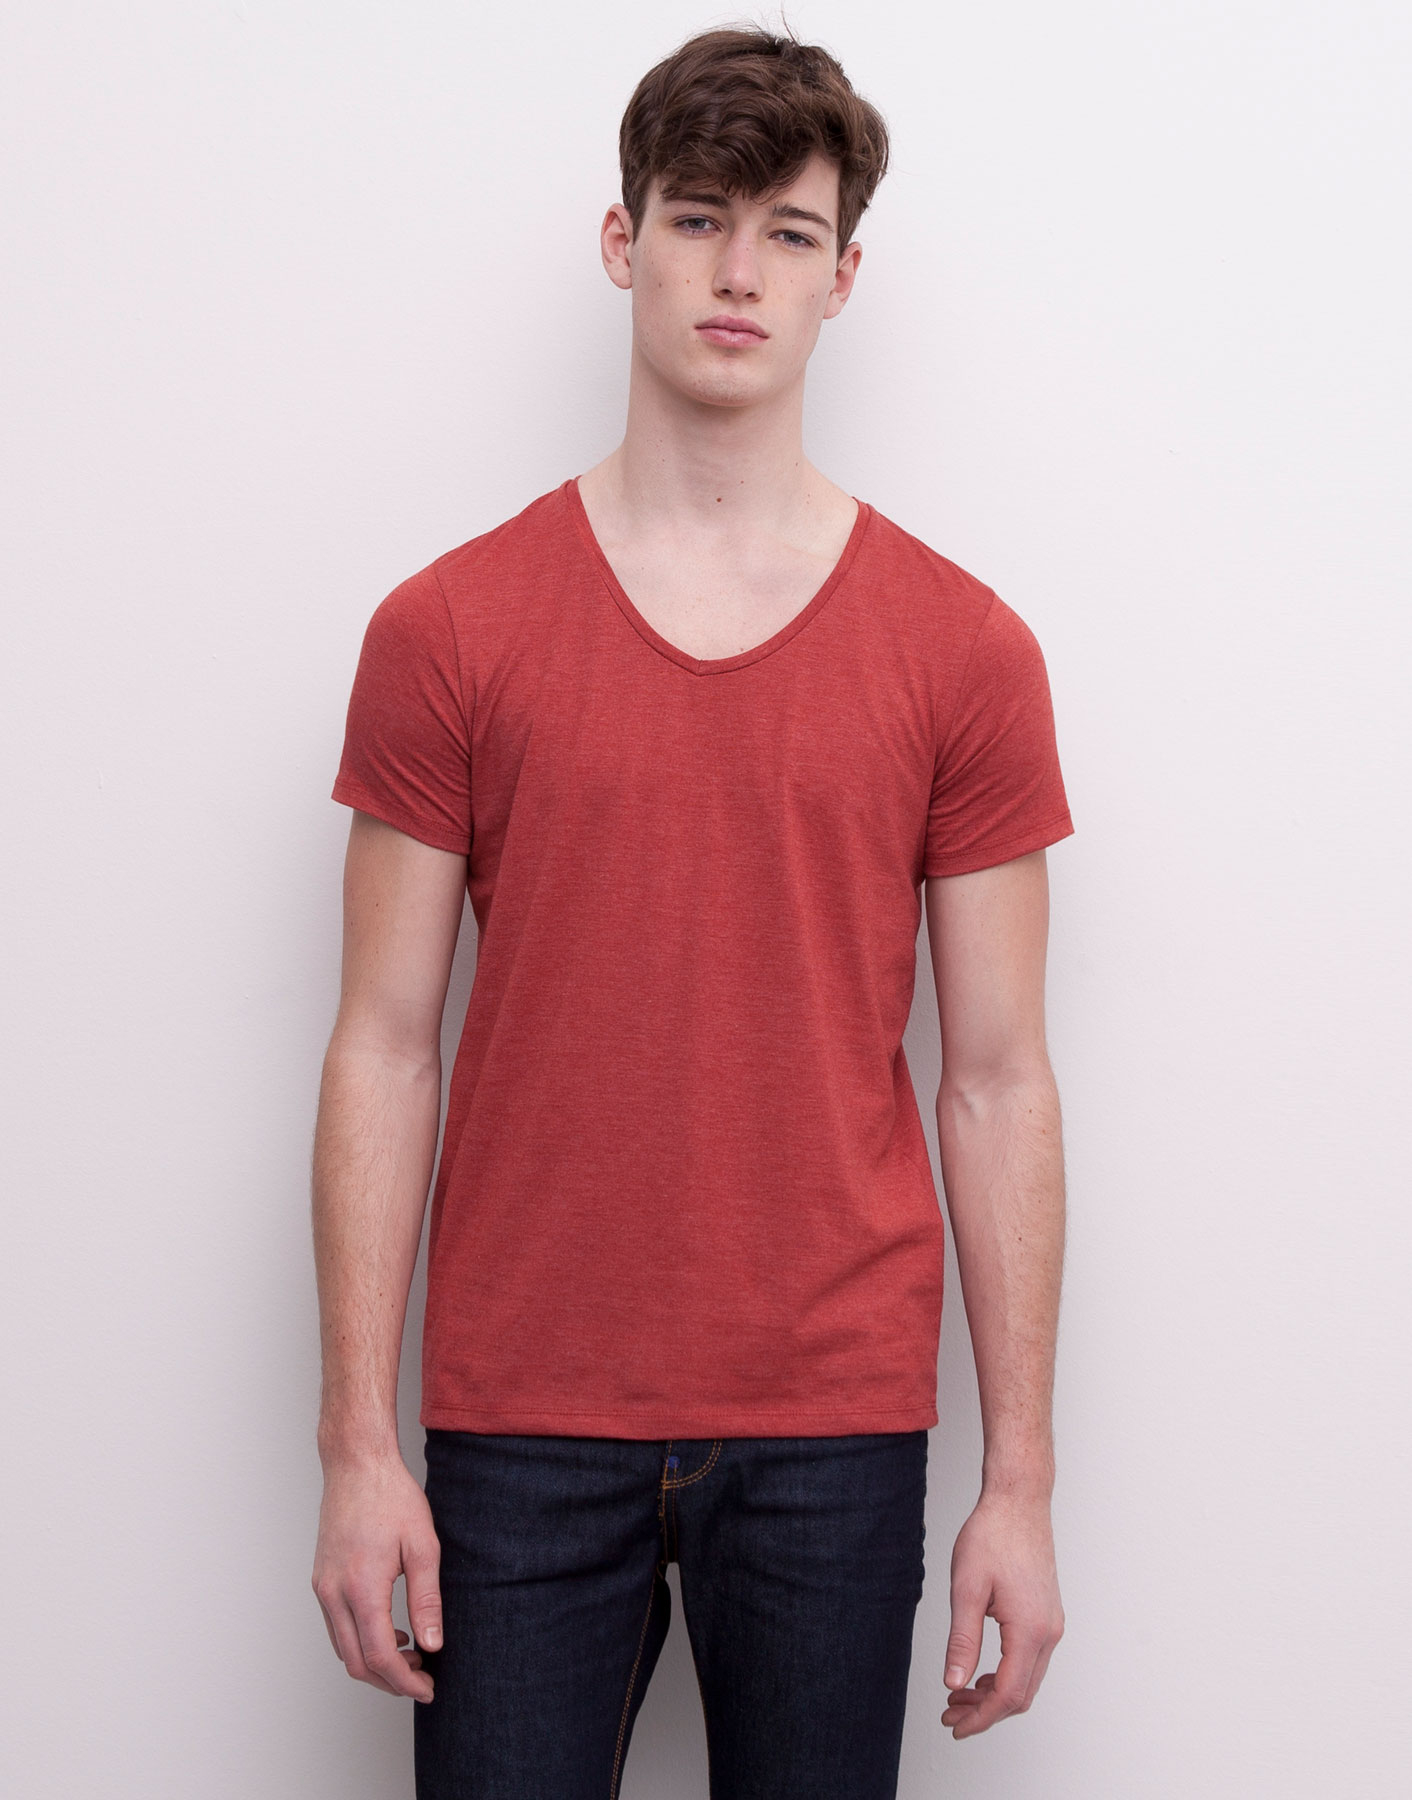 Pull and bear v neck t shirt piglet anchorage